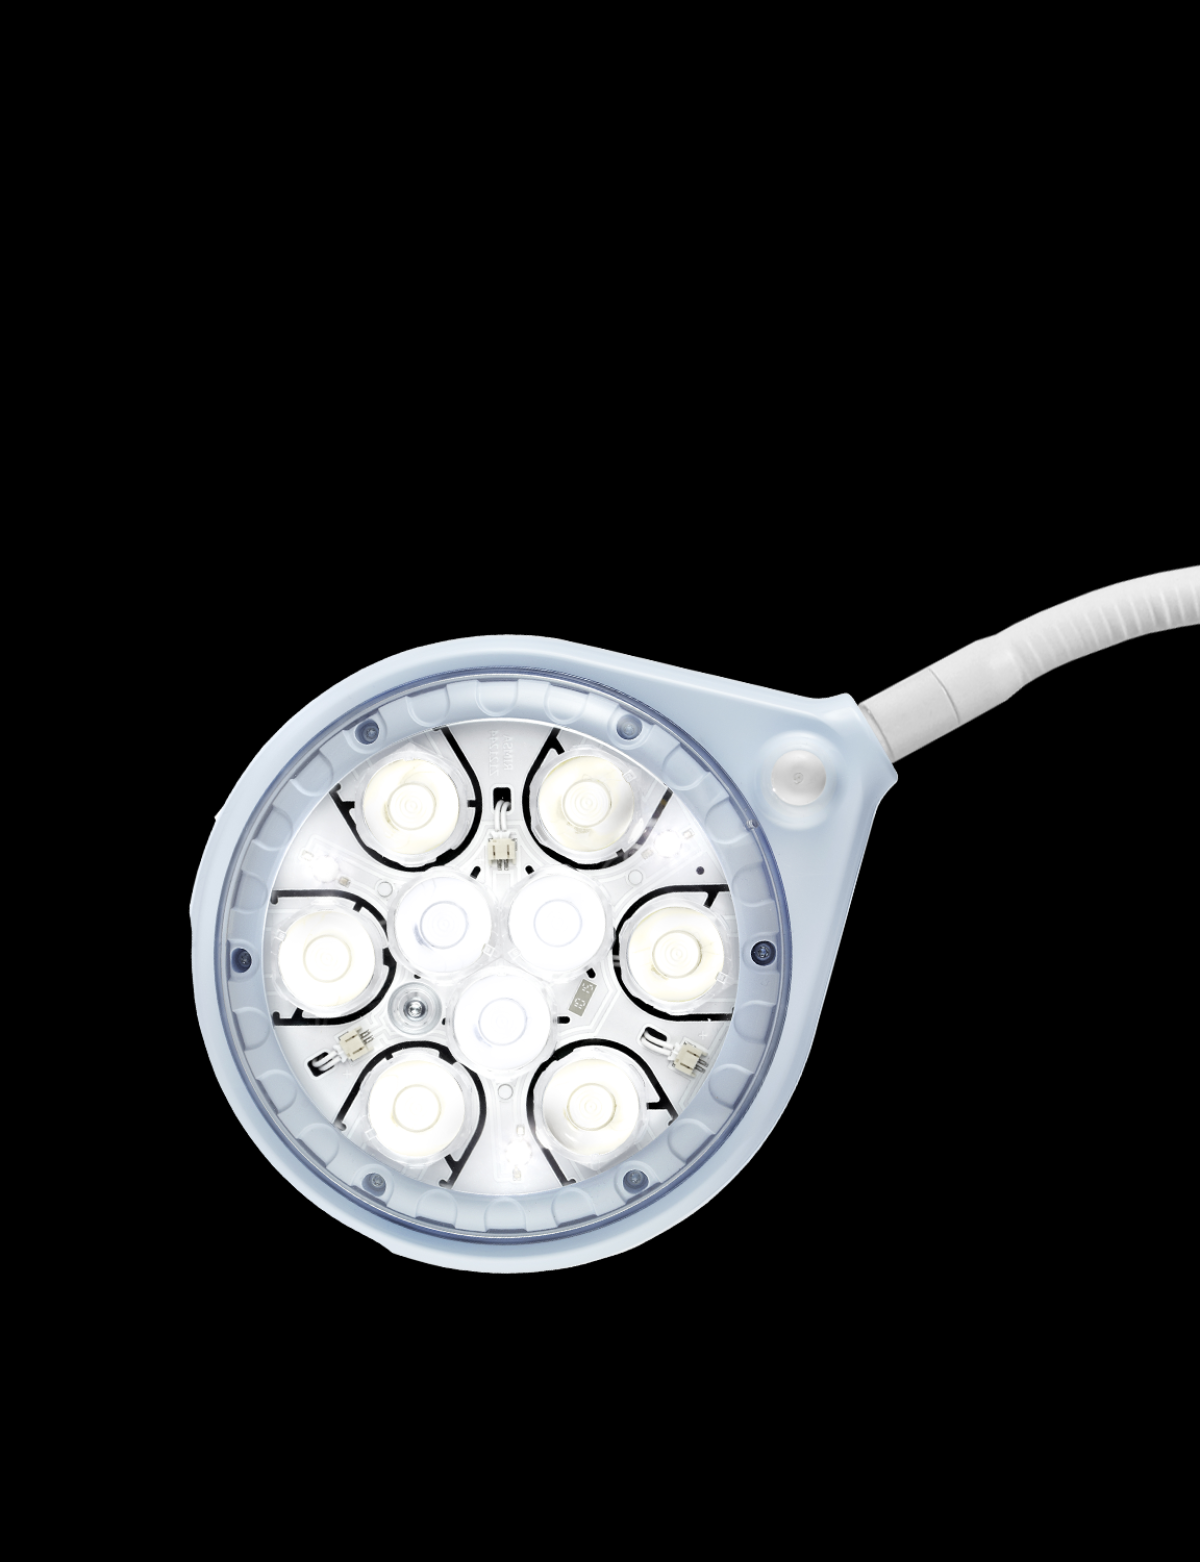 With its attractive and functional design, the PRIMA-FLEX is a concentrate of technology with incomparable performance: the best for an observation lamp.<br />
The round and ultra-flat shape of the light makes the product ergonomic and suitable for any type of installation, from small surgical operations to intensive care units.